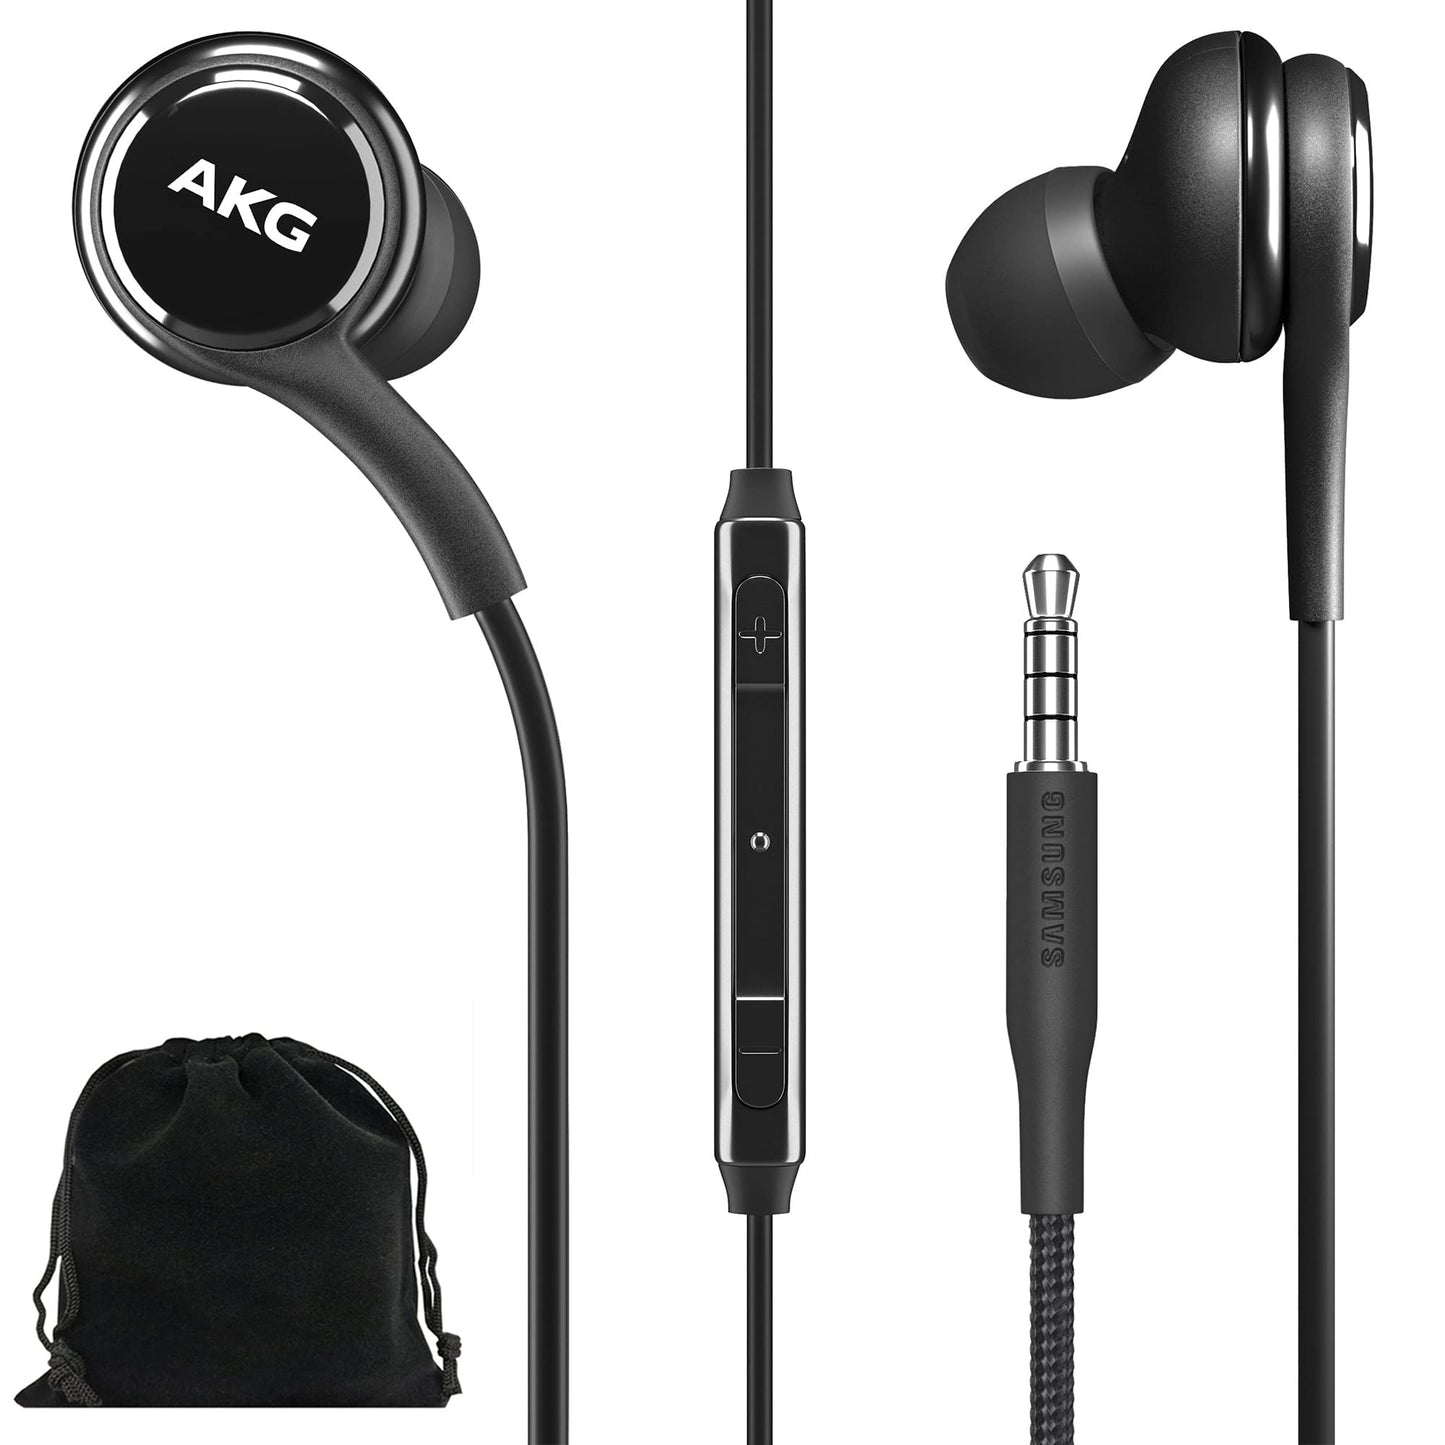 Samsung AKG Earbuds Original 3.5mm in-Ear Headphones with Remote & Mic for Galaxy A71, A31, Galaxy S10, S10e, Note 10, Note 10+, S10 Plus, S9 - Braided, Includes Velvet Carrying Pouch - Black